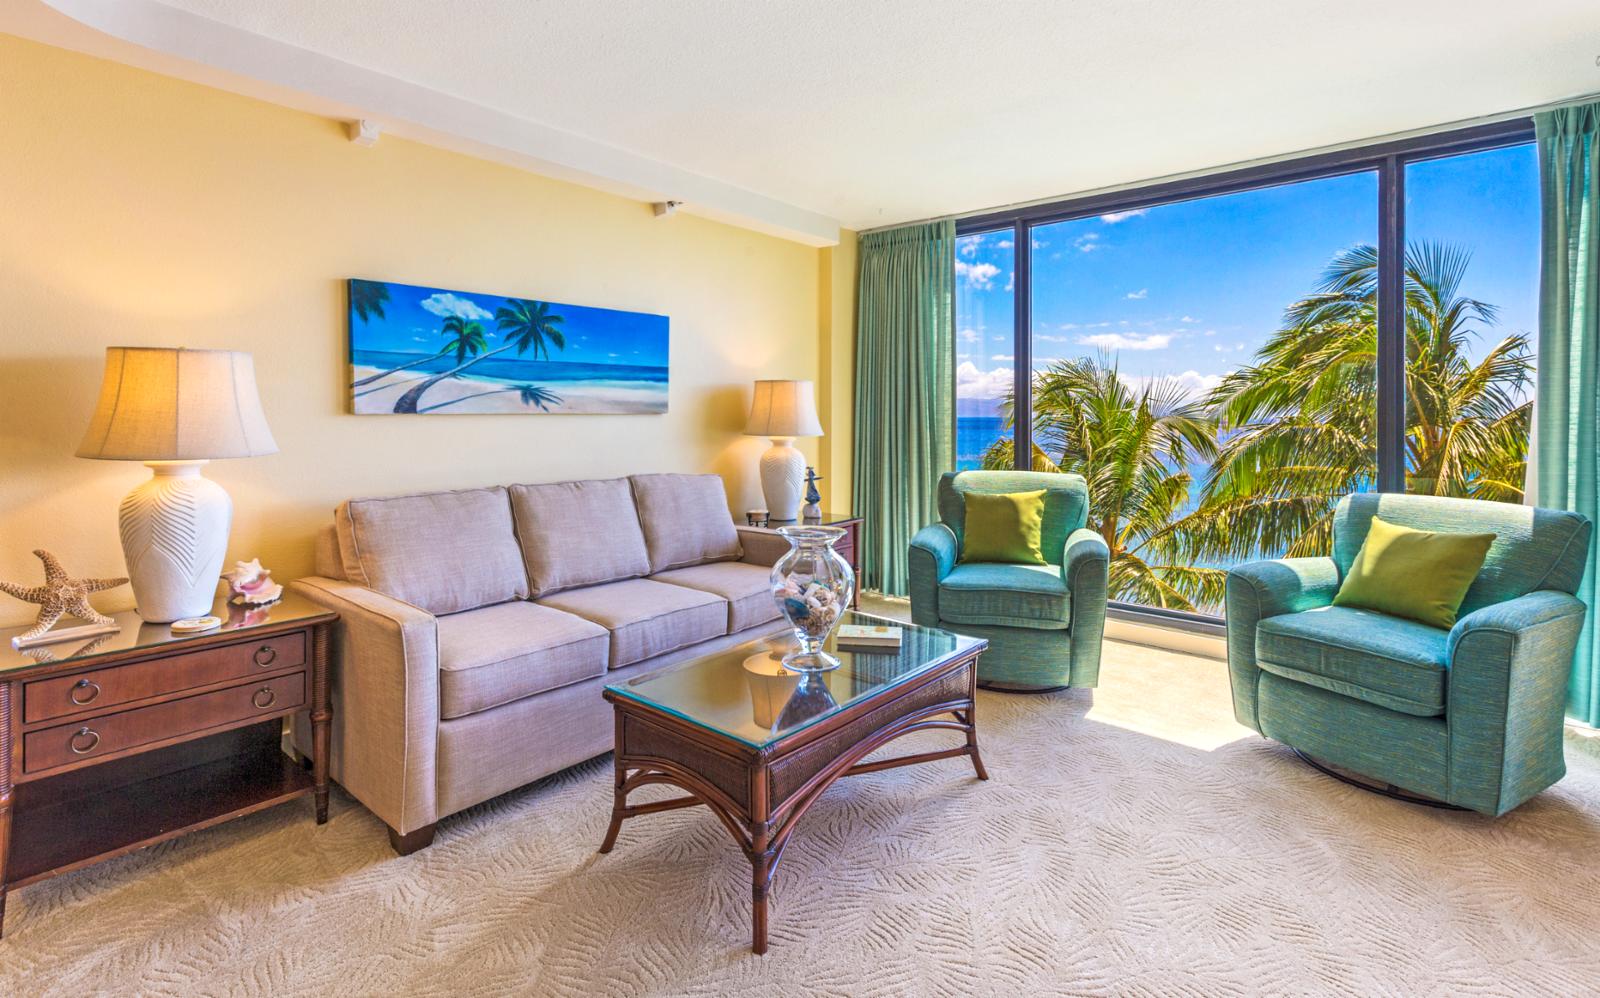 Comfortable couch with ocean views while you watch television